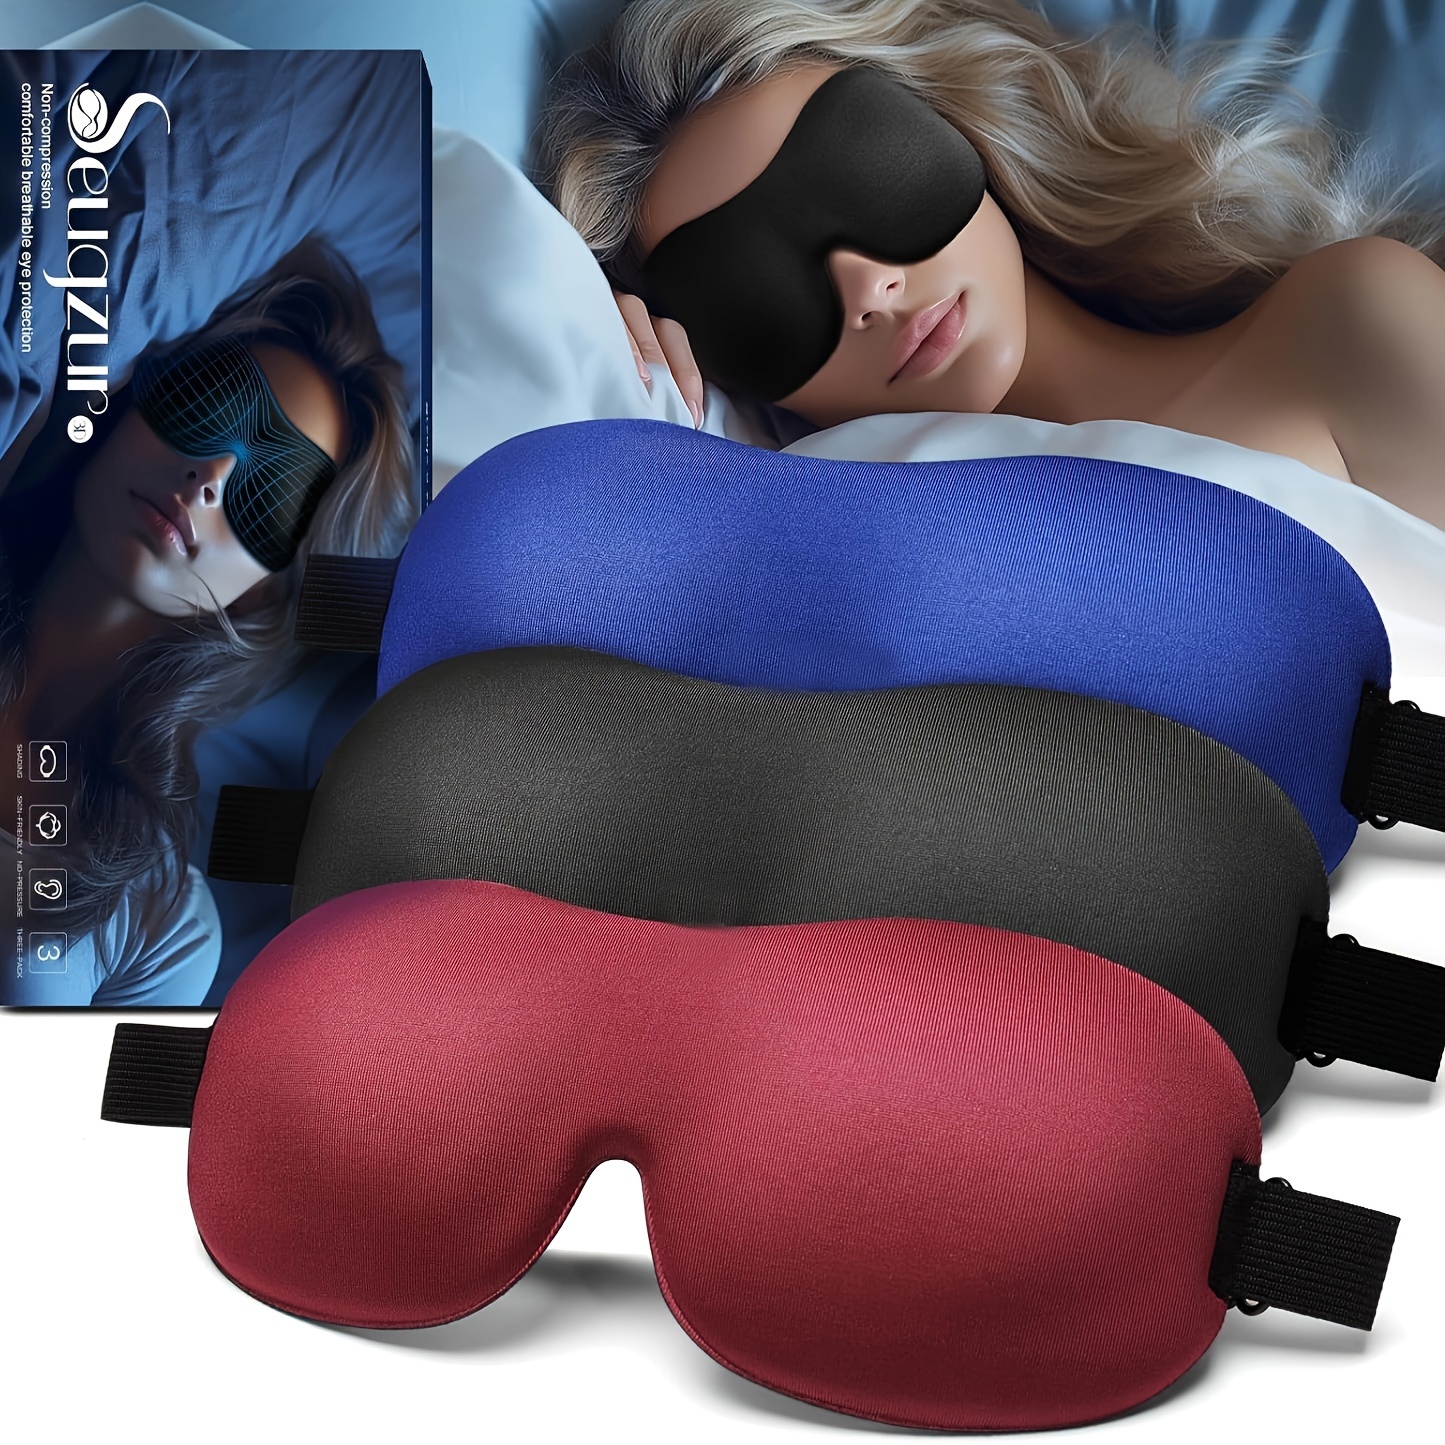 

3pcs 3d Sleep Eye Mask, Designed For Side Sleepers, Wake Up Refreshed - Blackout And Comfortable For Both Men And Women